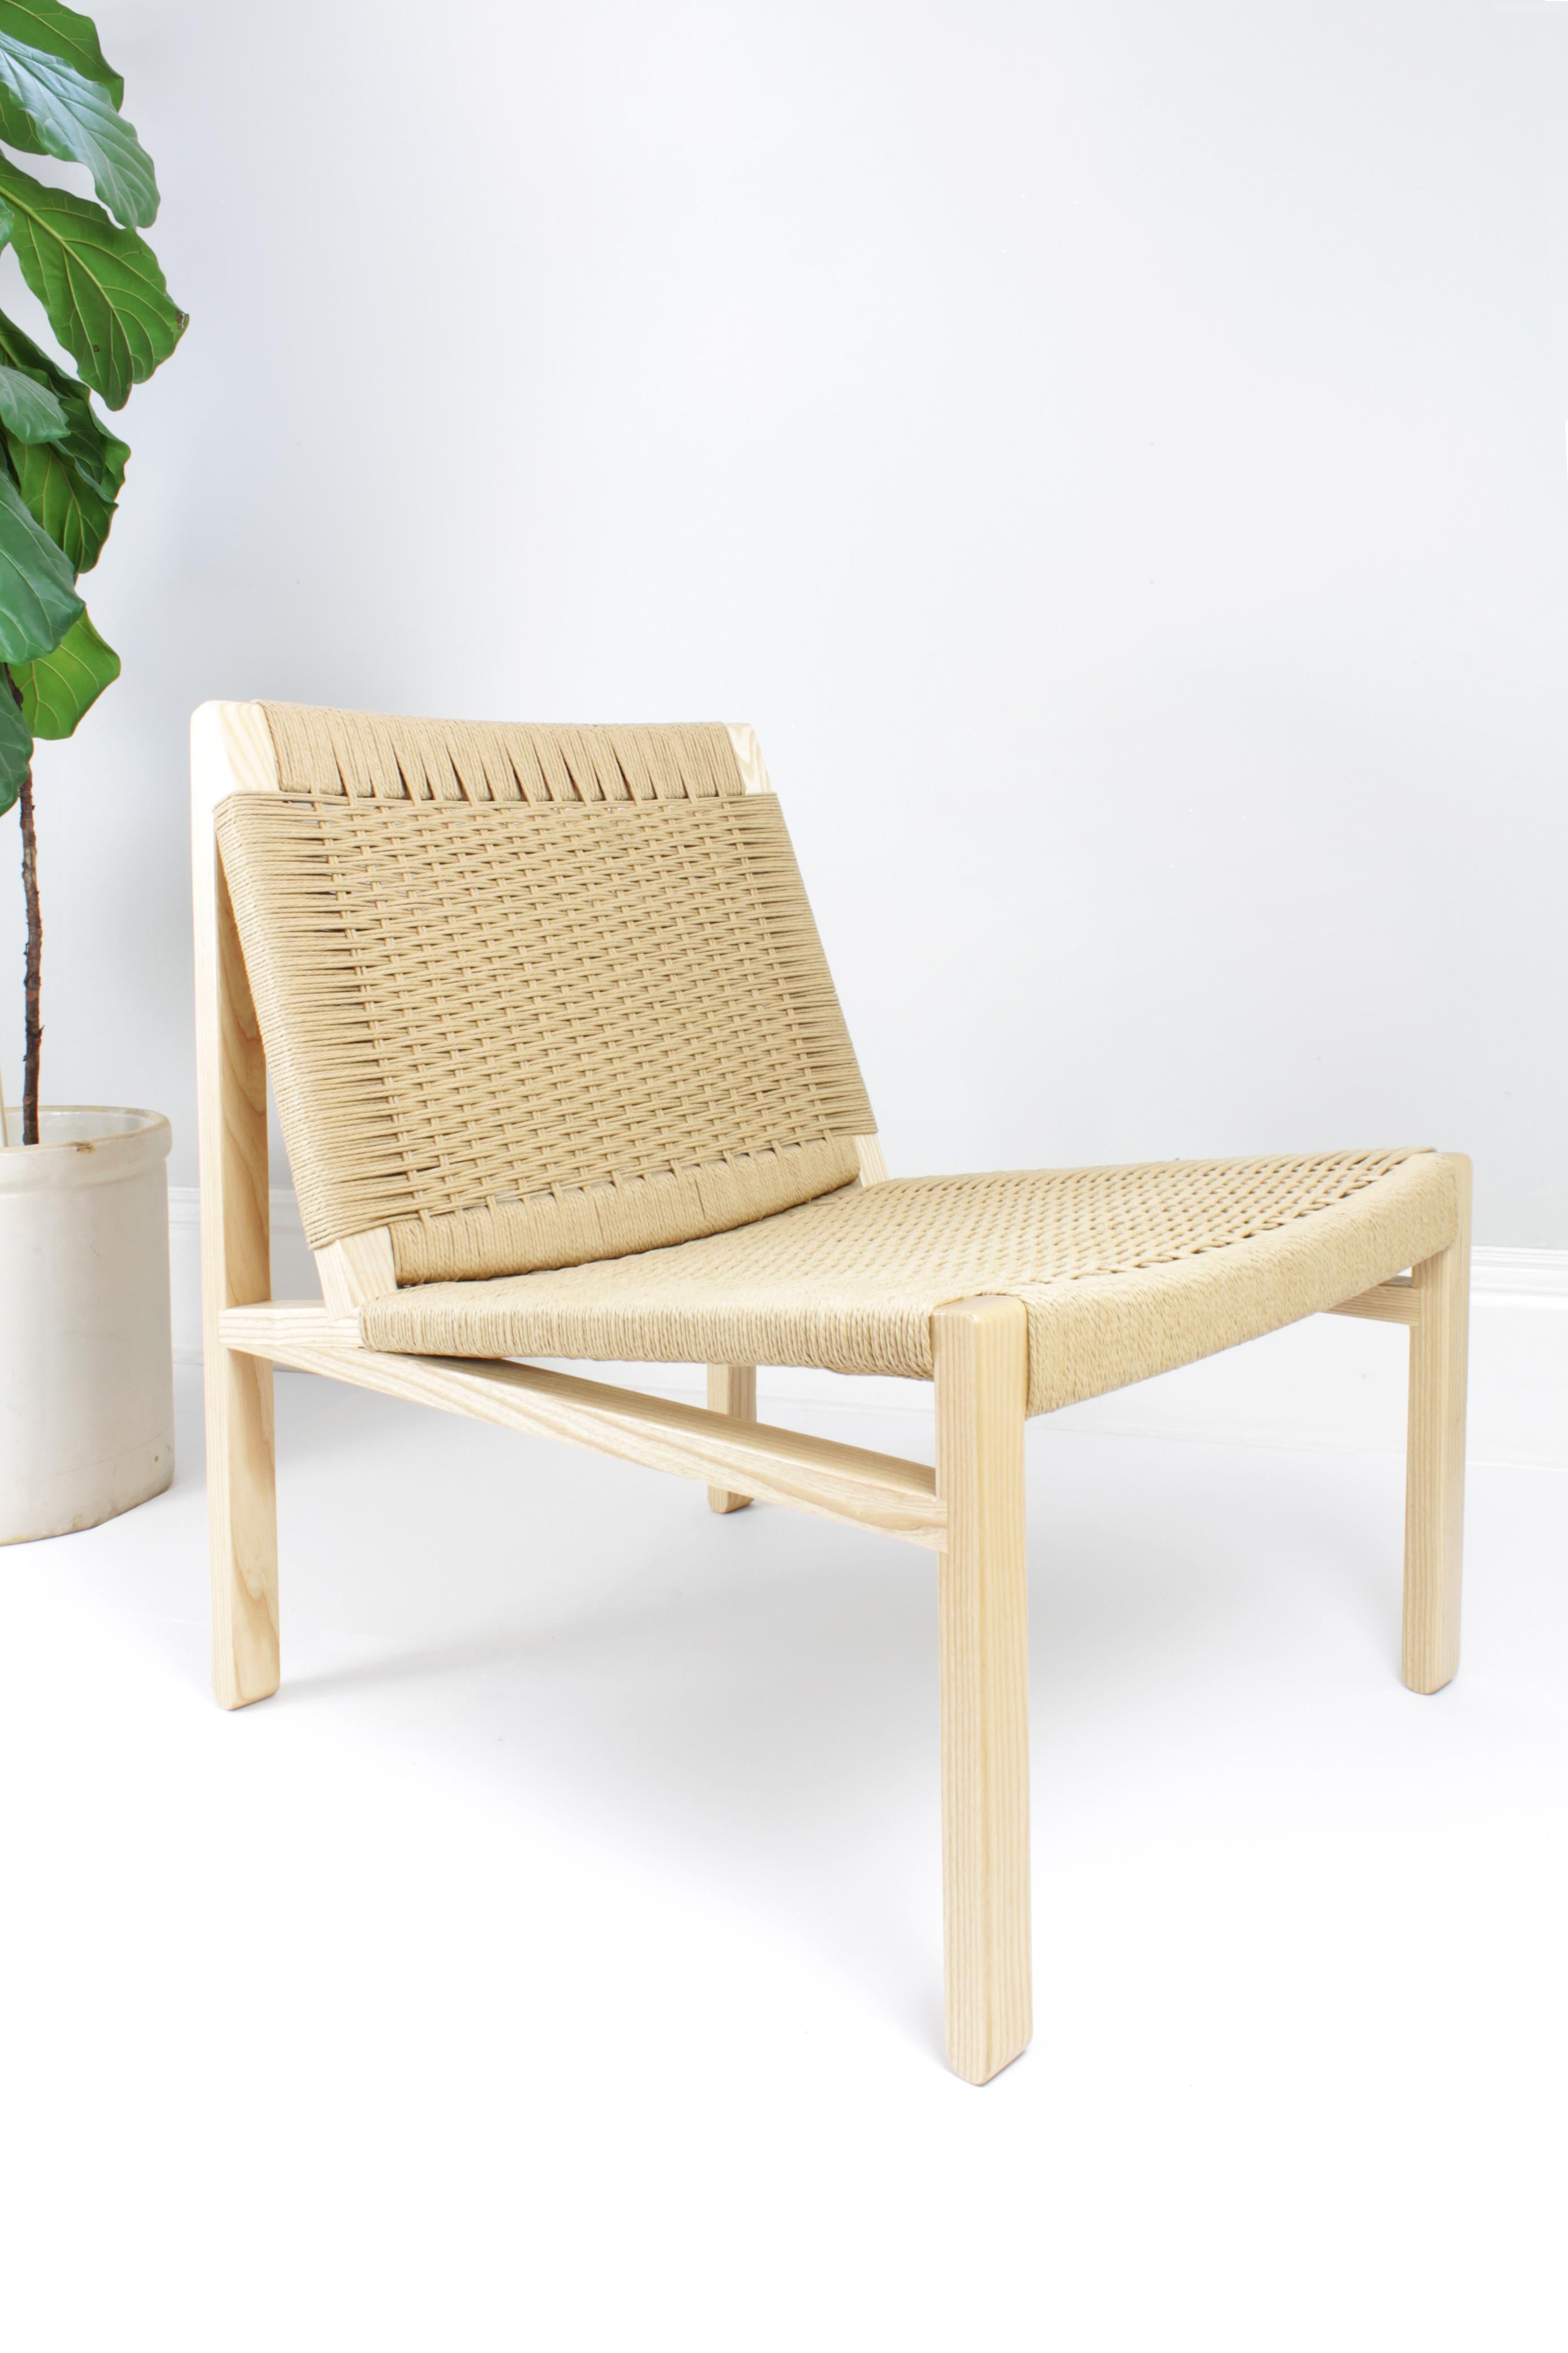 A Classic style re-imagined. The Lars lounge chair features a solid wood frame with your choice of Danish cord or woven leather straps for the seat and back.